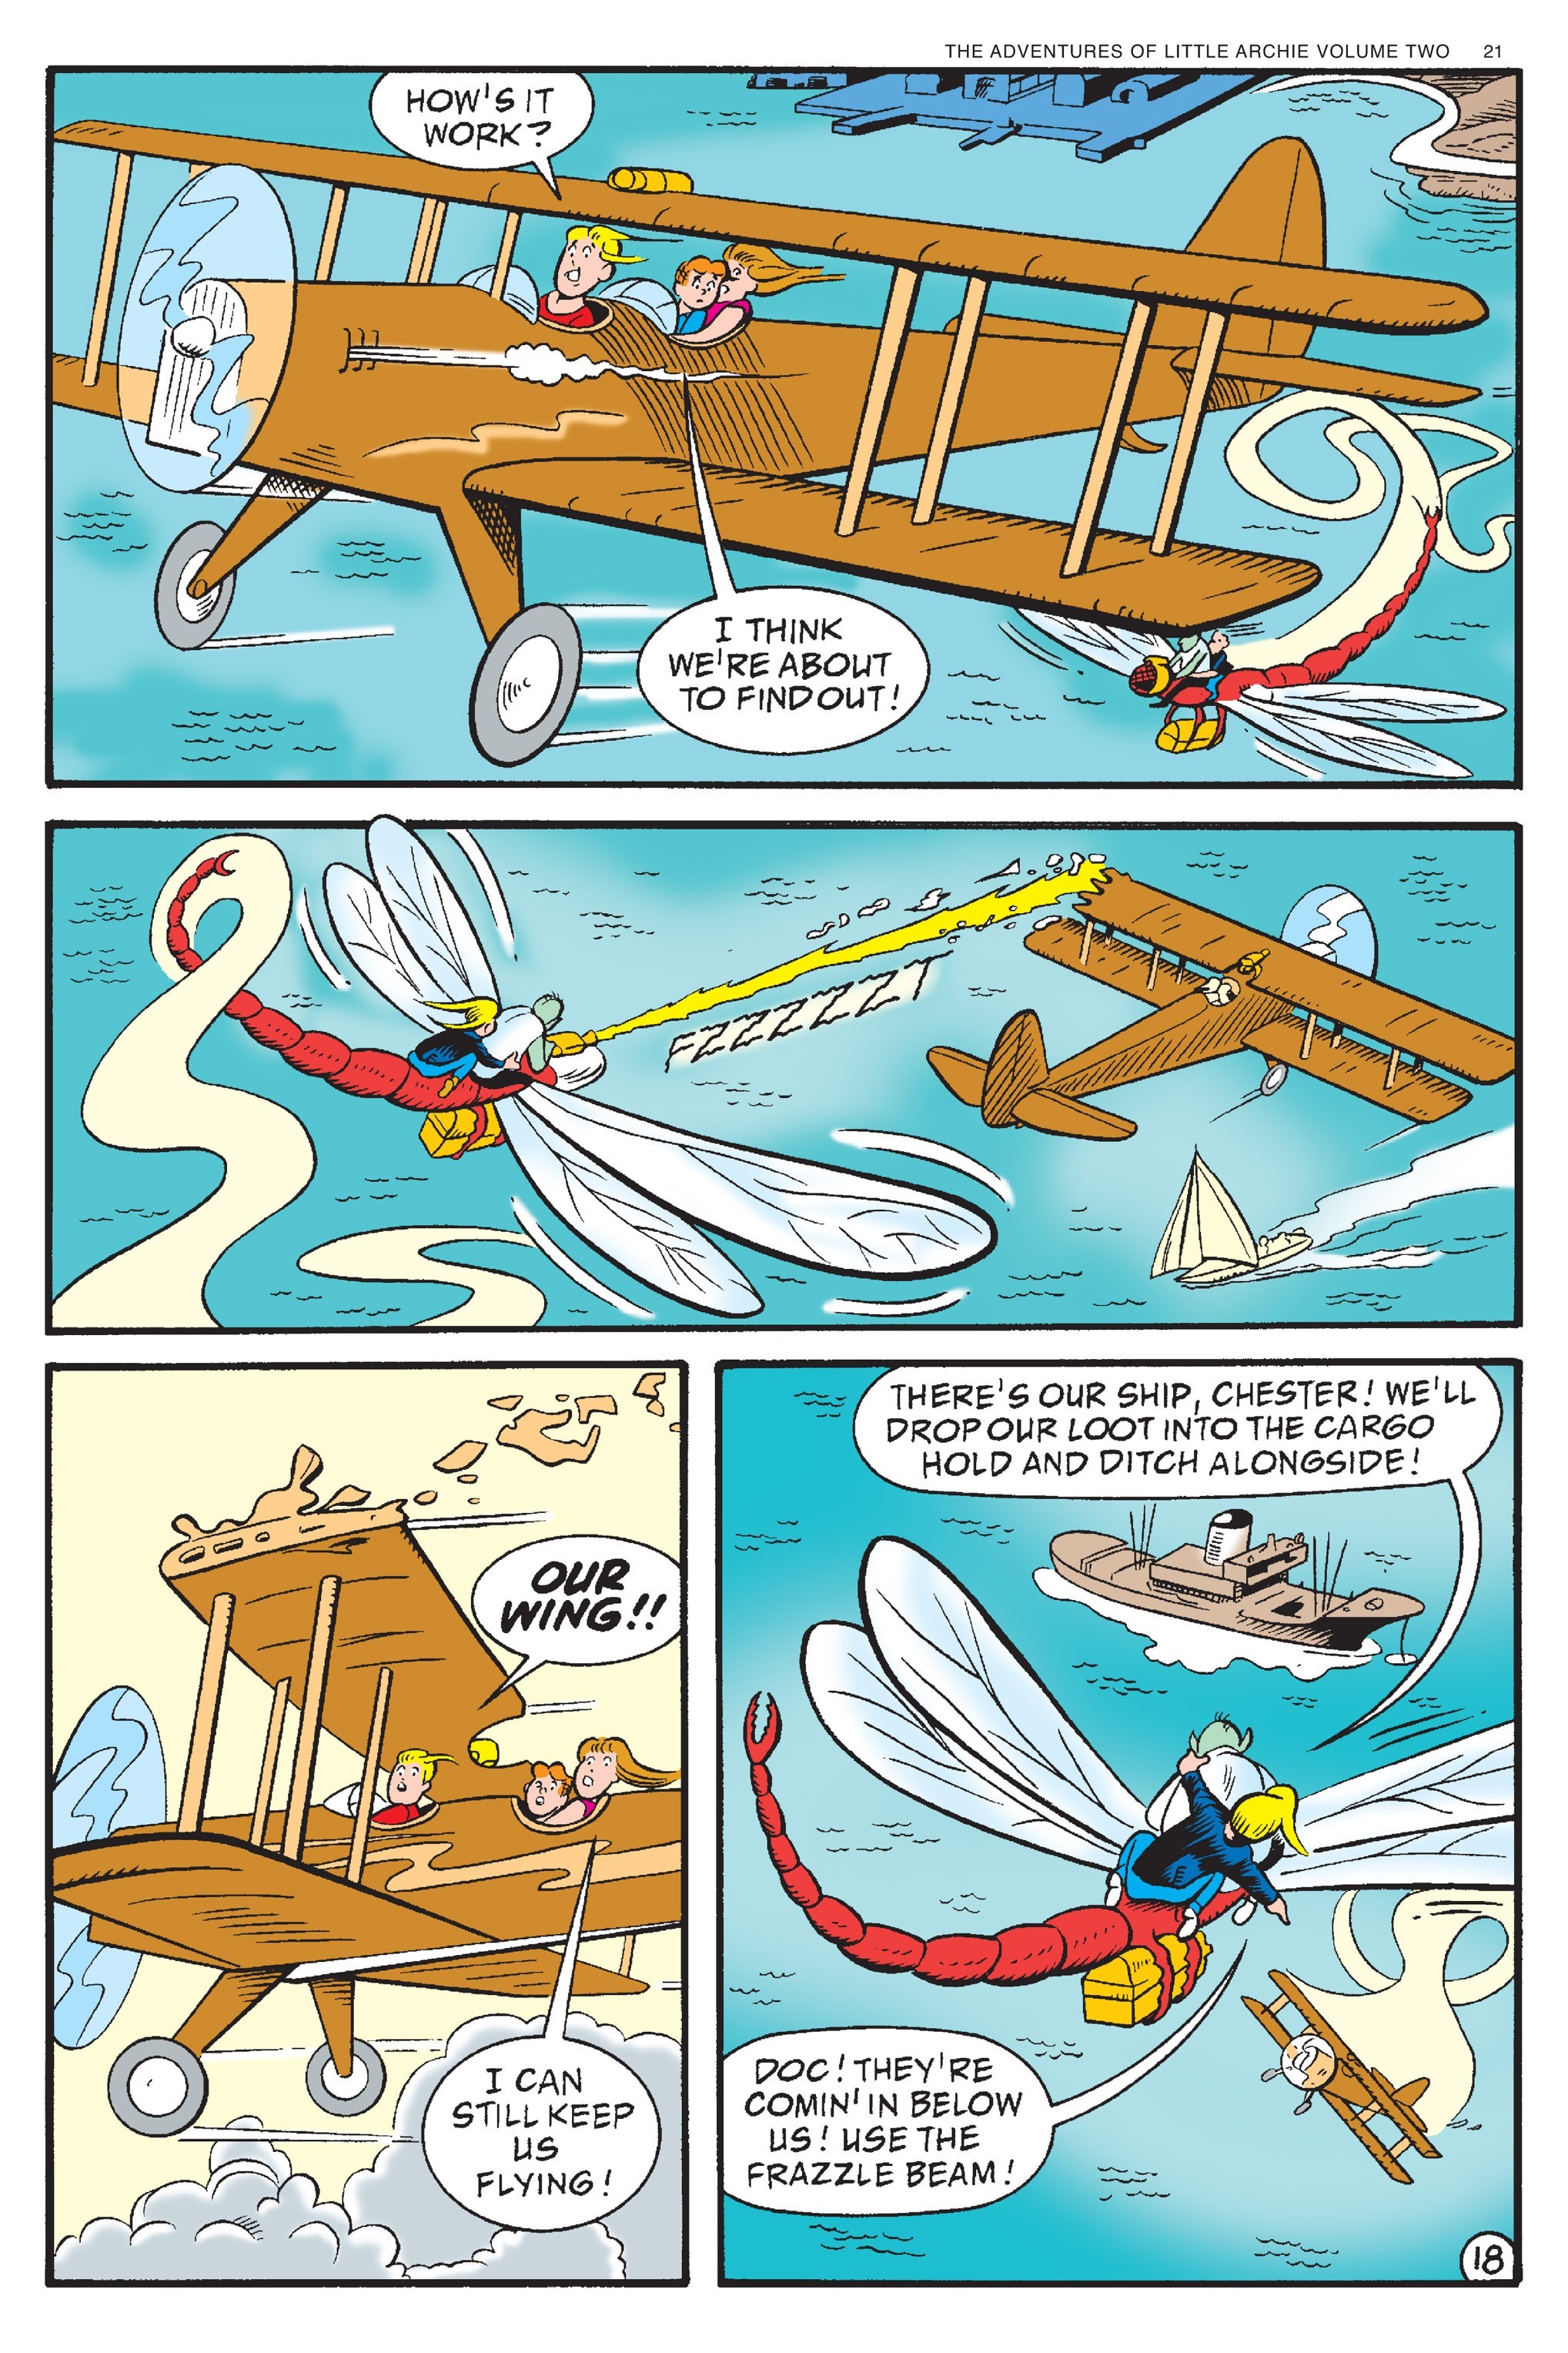 Read online Adventures of Little Archie comic -  Issue # TPB 2 - 22